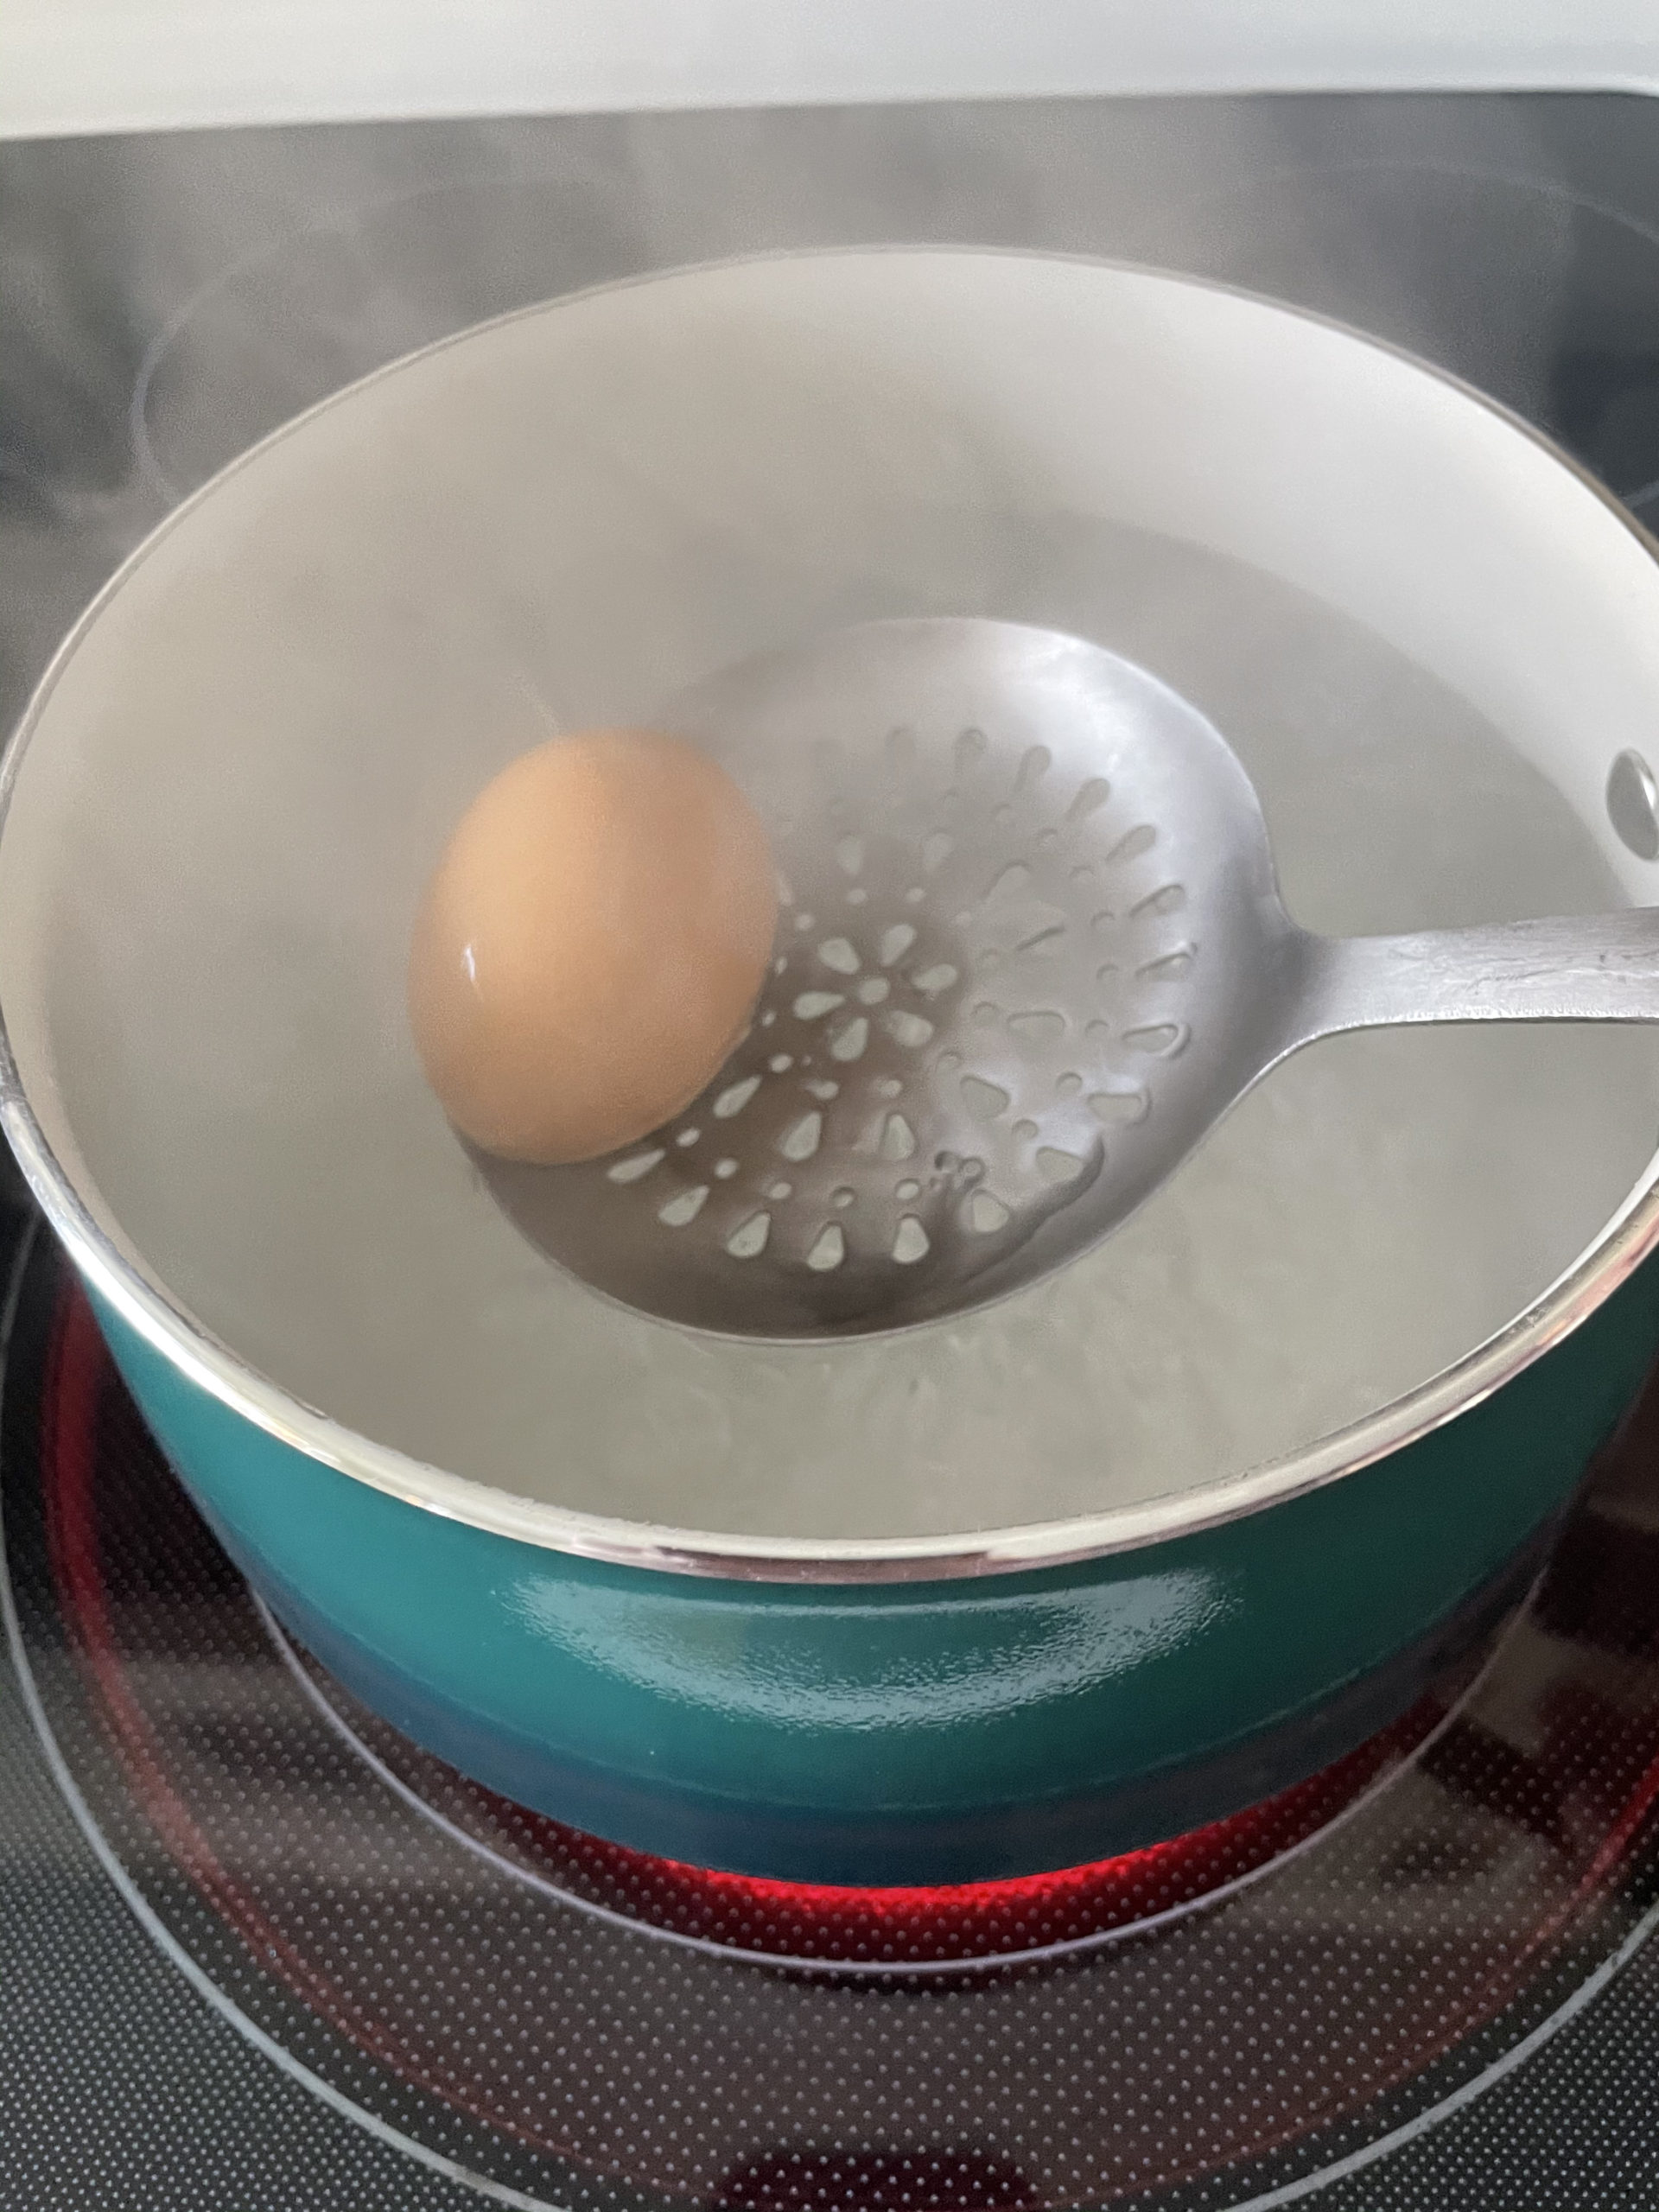 Starting to boil eggs with boiling water